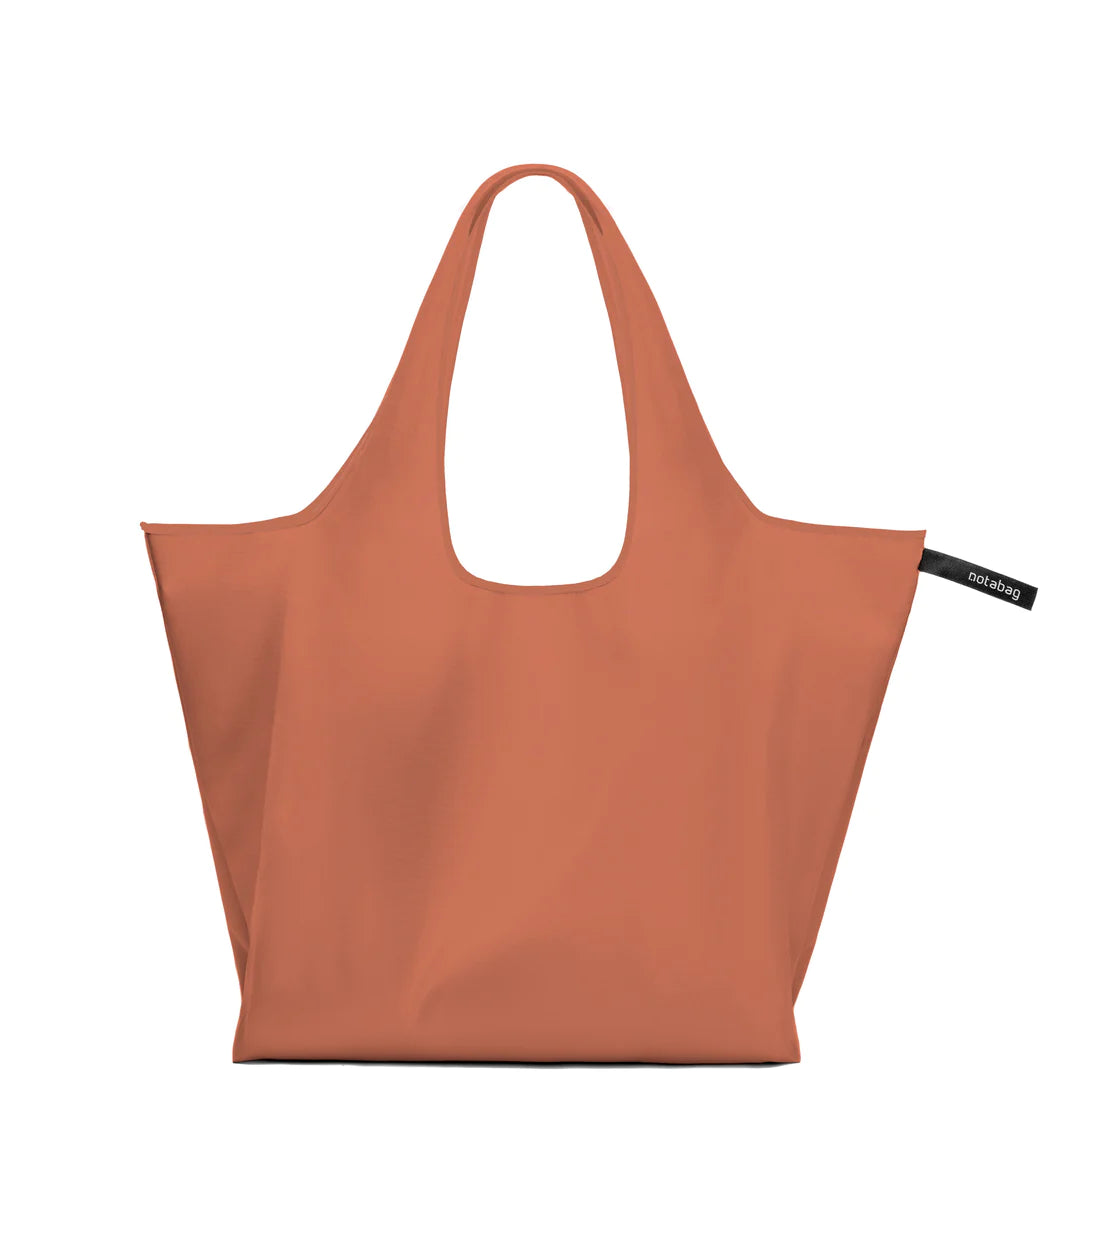 Notabag Foldable reusable backpack/tote in terracotta unfolded as a tote bag